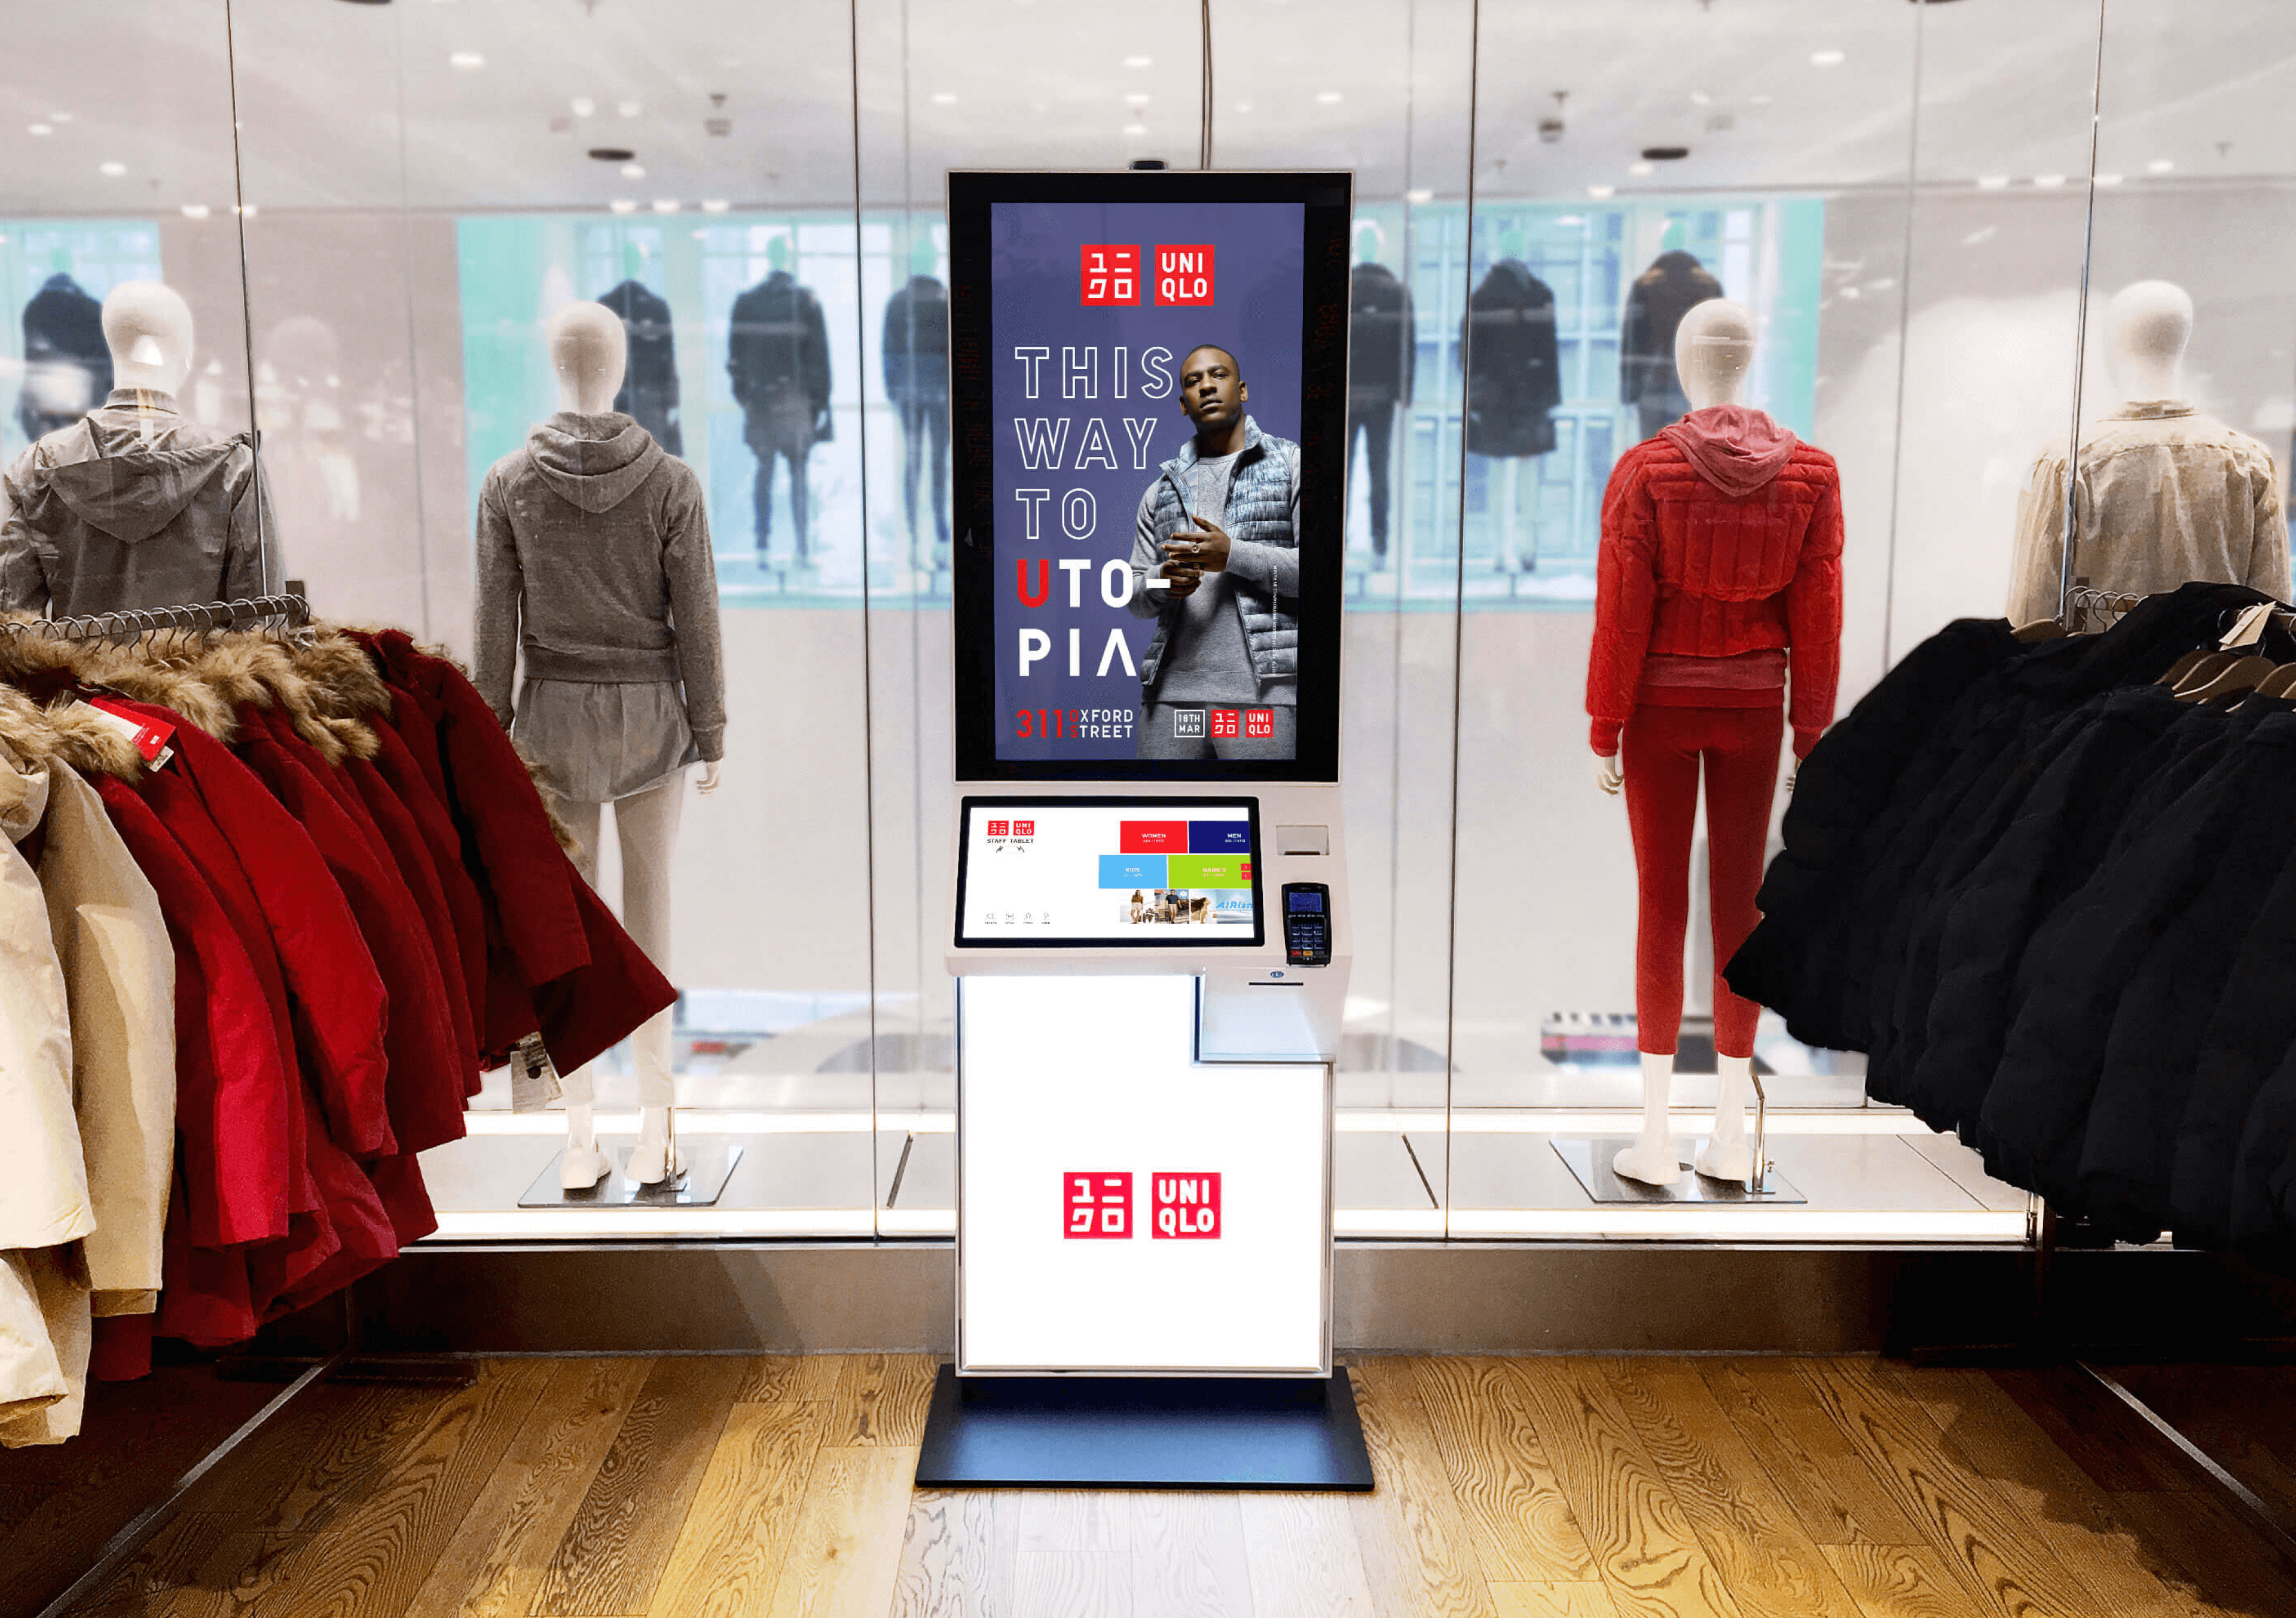 The Uniqlo kiosk is in situ within the Oxford St store in London